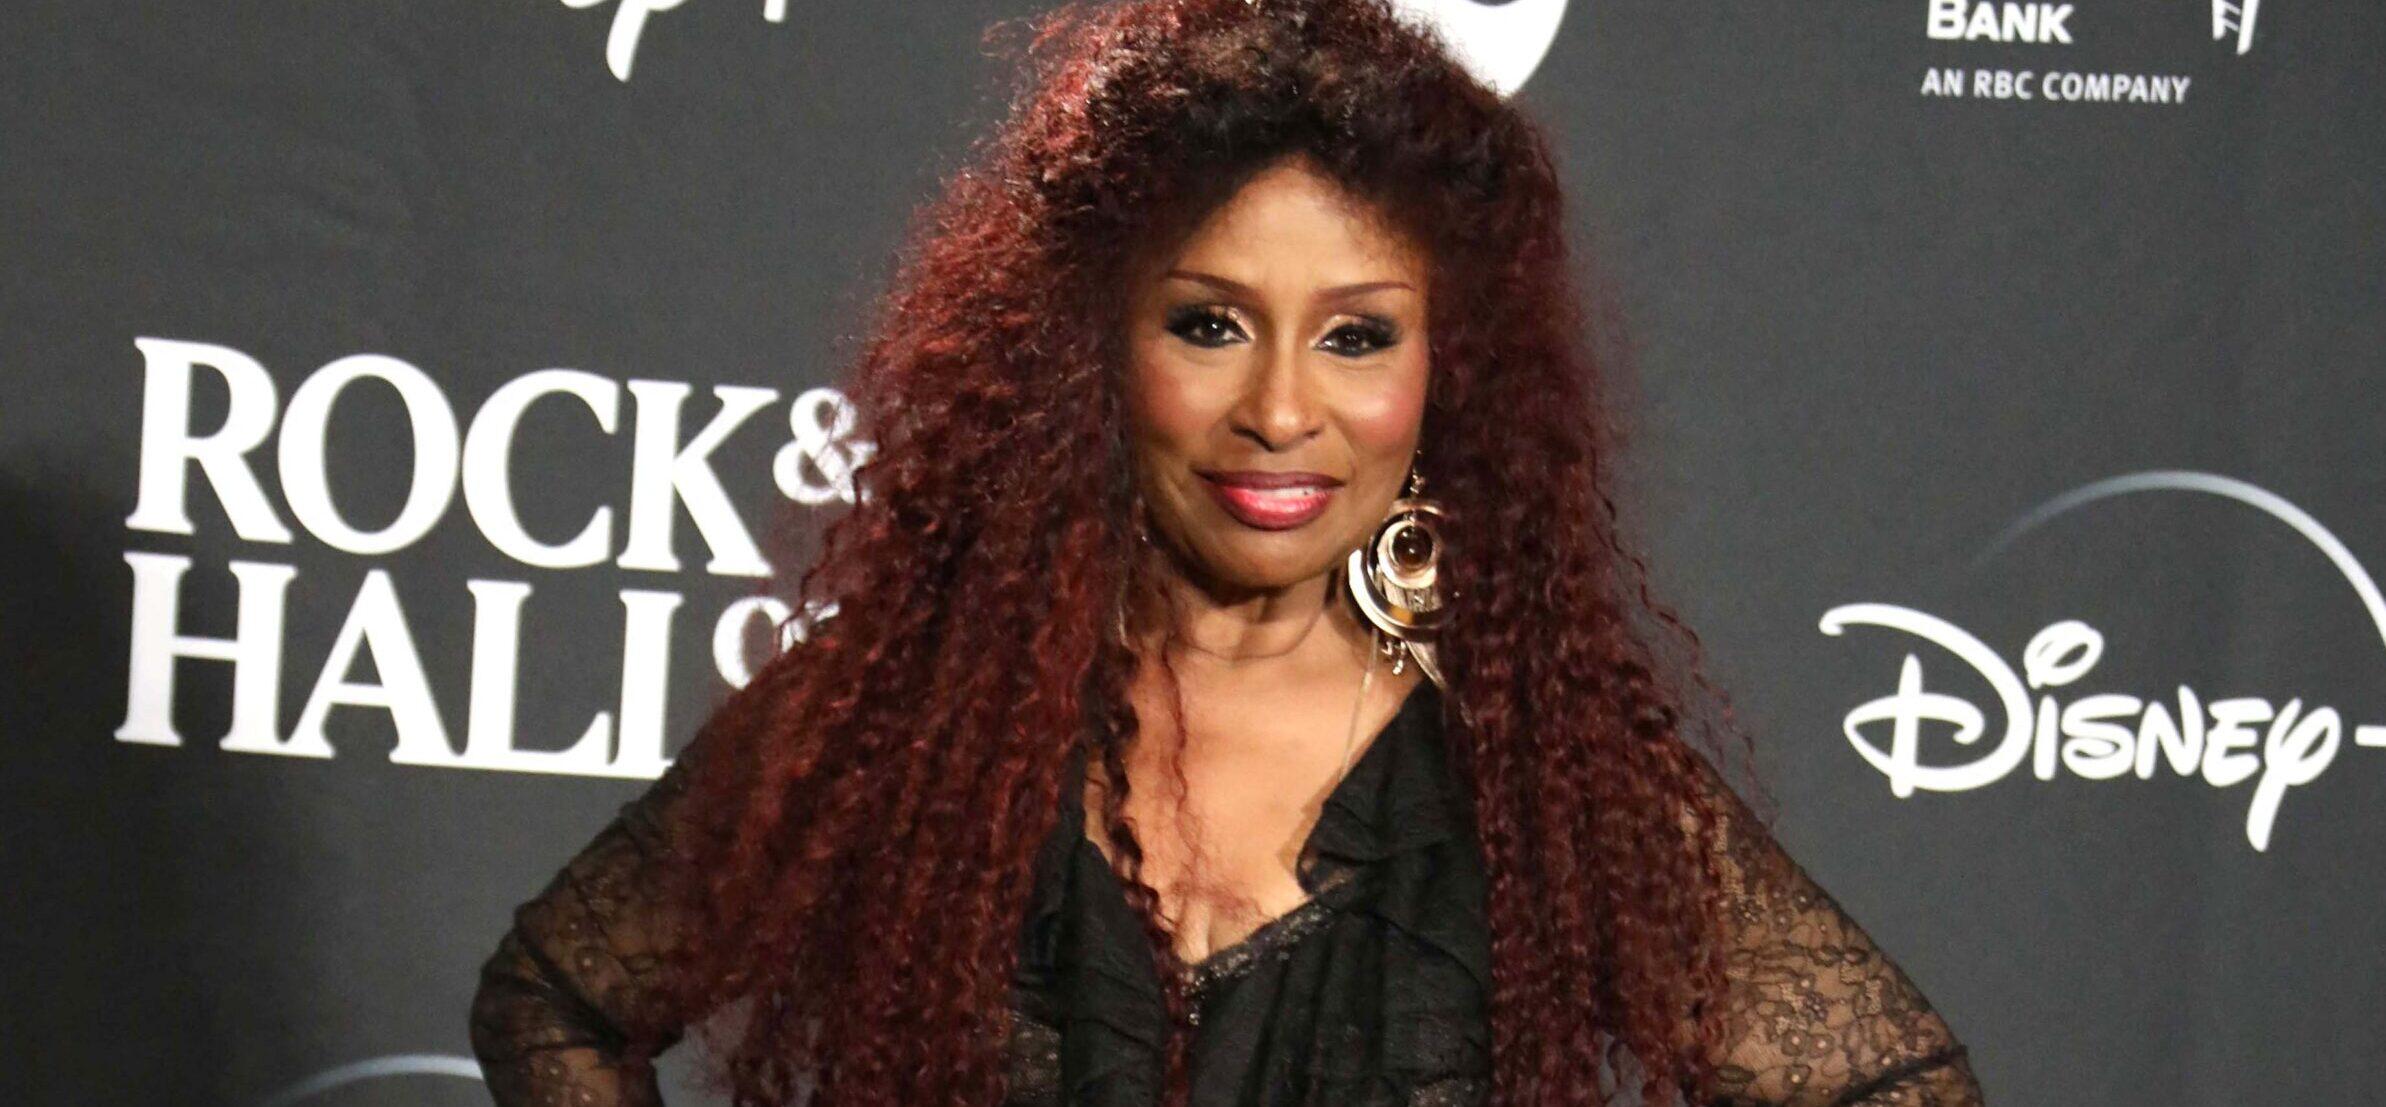 Chaka Khan Sued After Family Dog Allegedly Attacks Neighbor